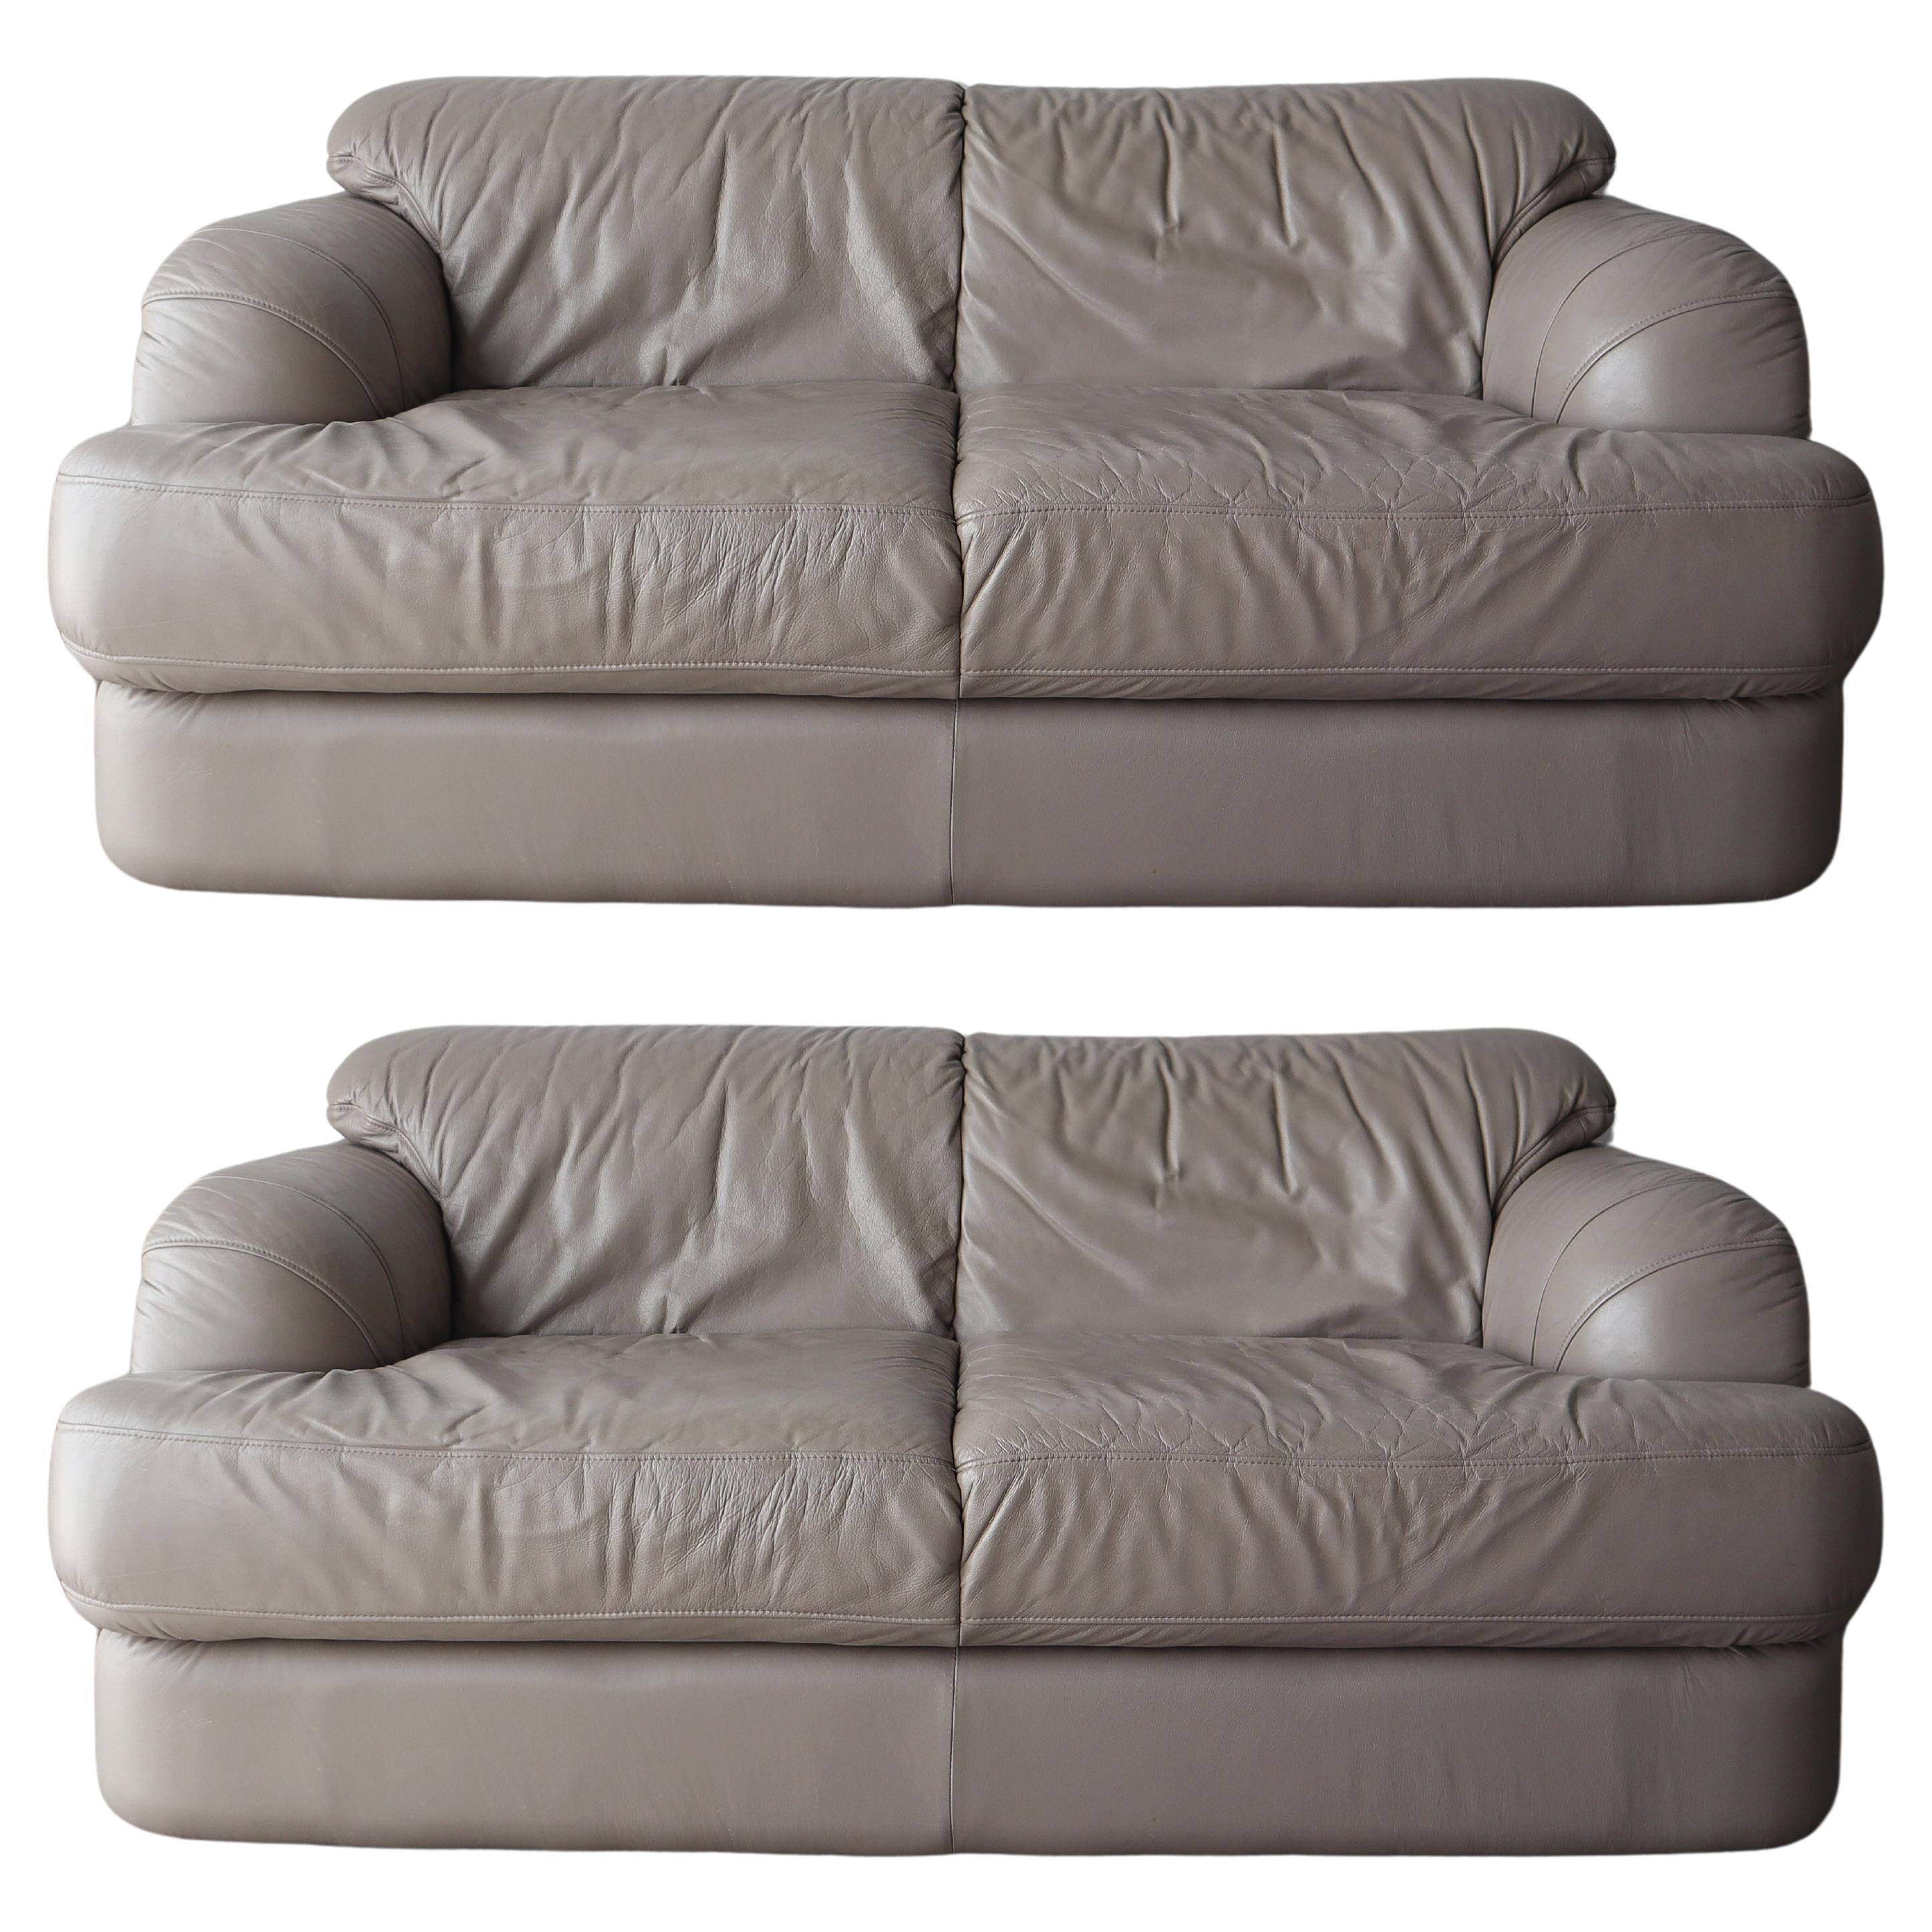 Post Modern German Leather Loveseat Sofas - A Pair For Sale